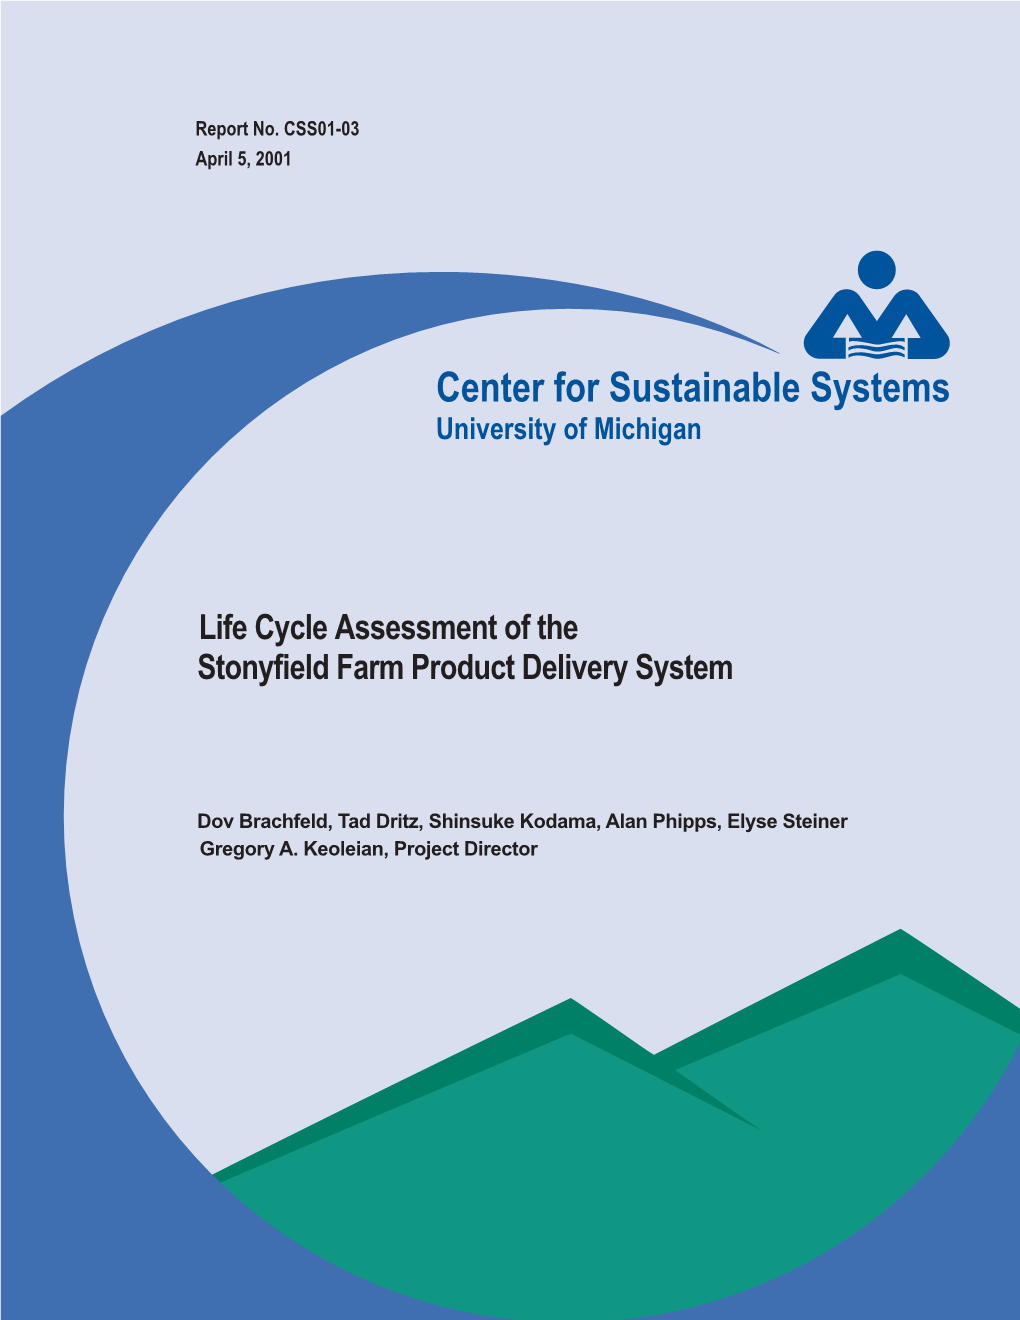 Life Cycle Assessment of the Stonyfield Farm Product Delivery System